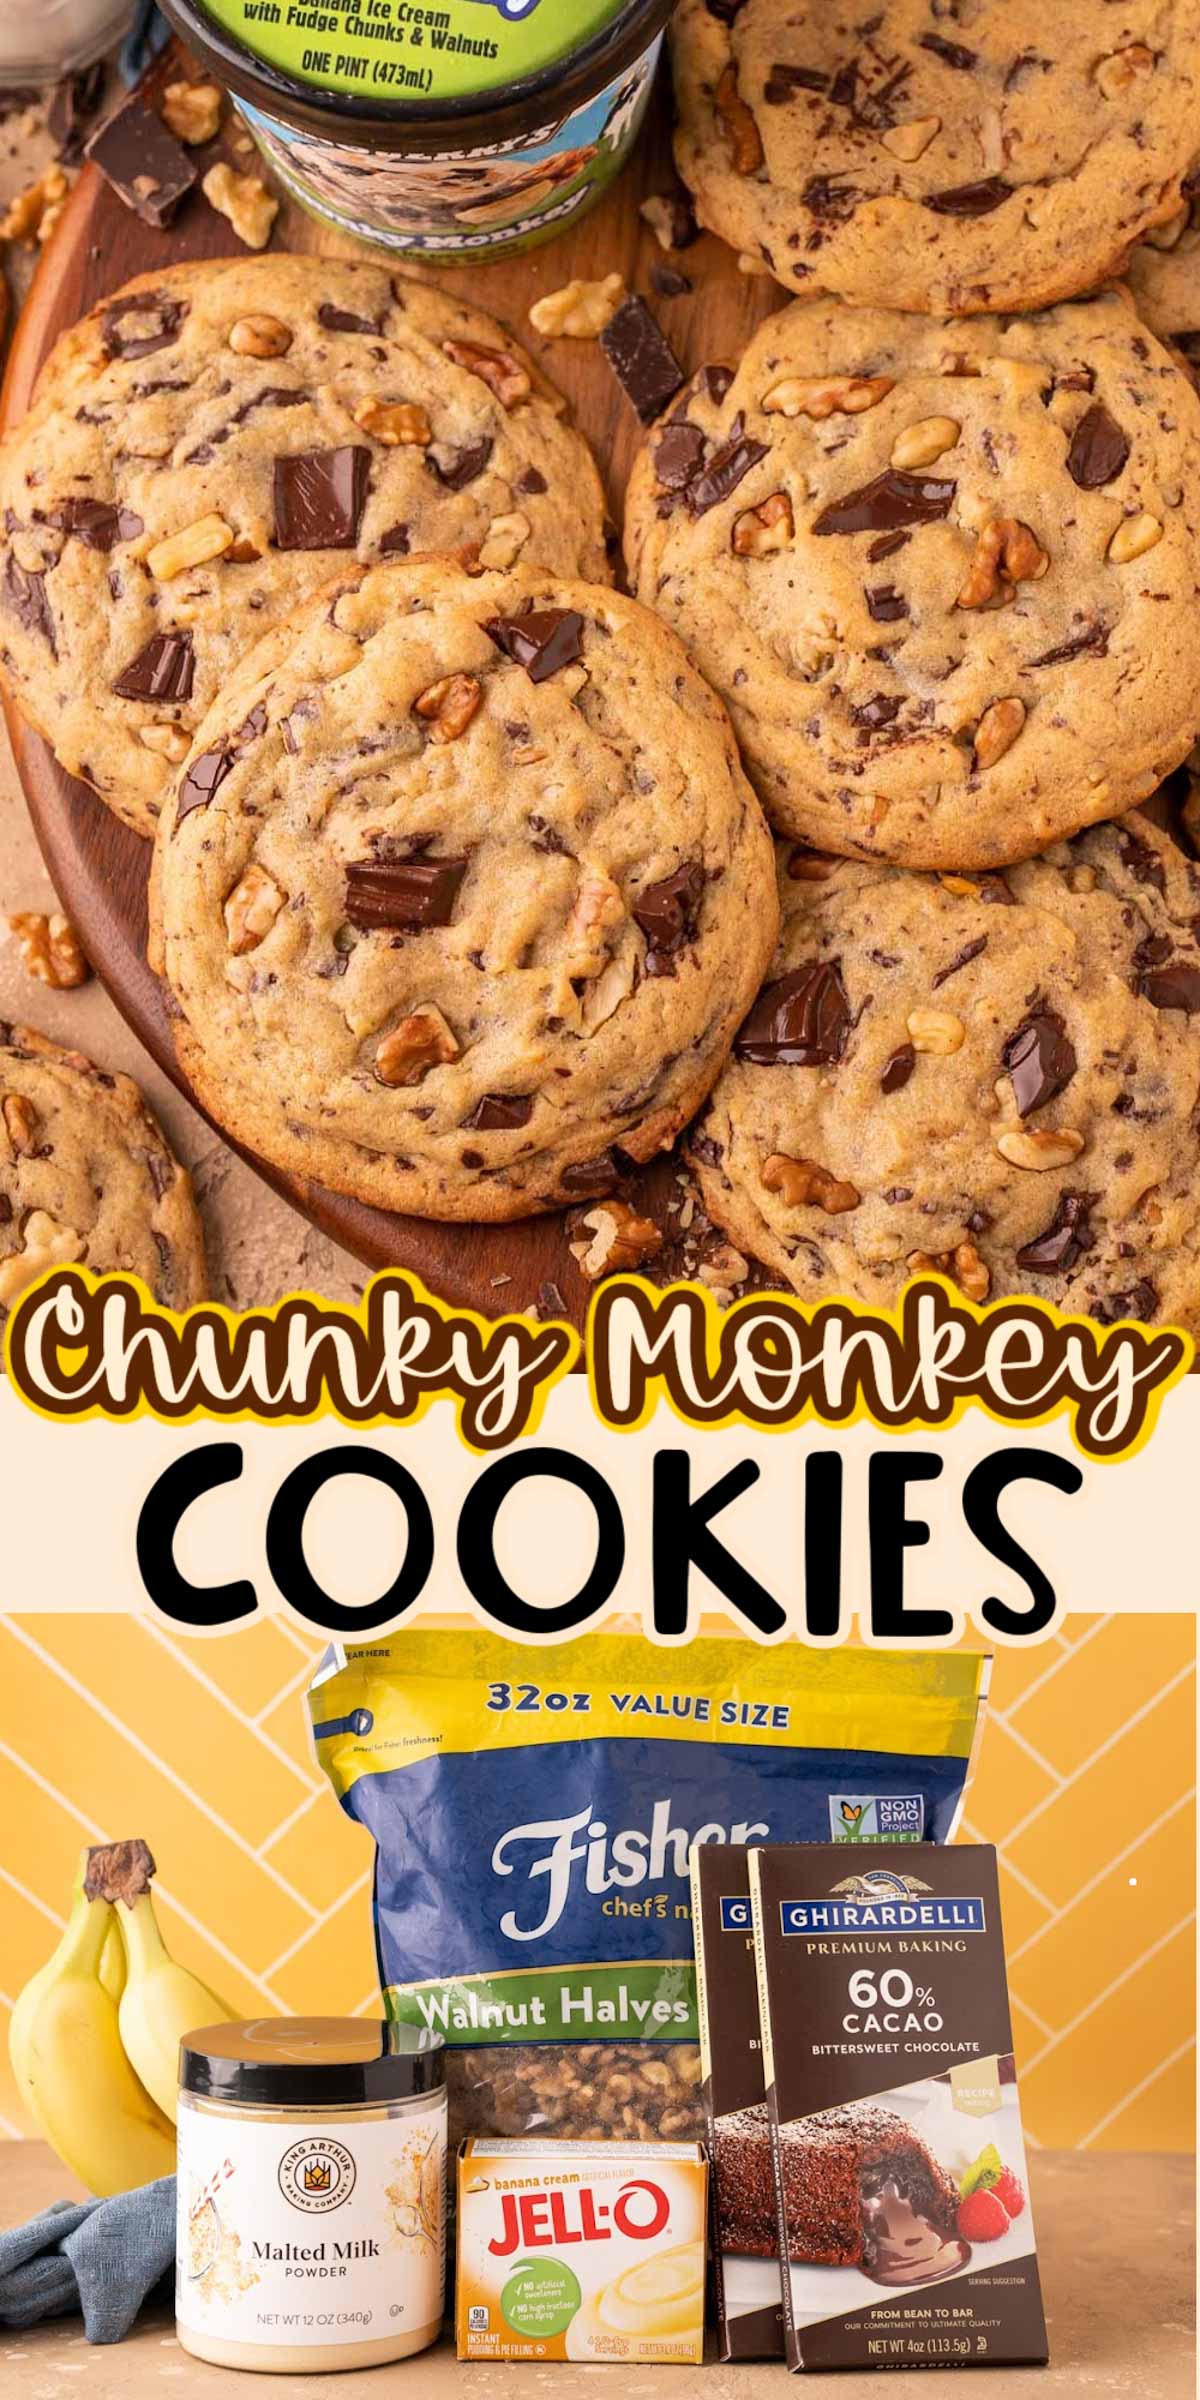 These Chunky Monkey Cookies are tender and delicious bakery-style cookies inspired by the famous Ben & Jerry's Ice Cream and loaded with banana flavor, chocolate chunks, and chopped walnuts! Ready in under 30 minutes! via @sugarandsoulco